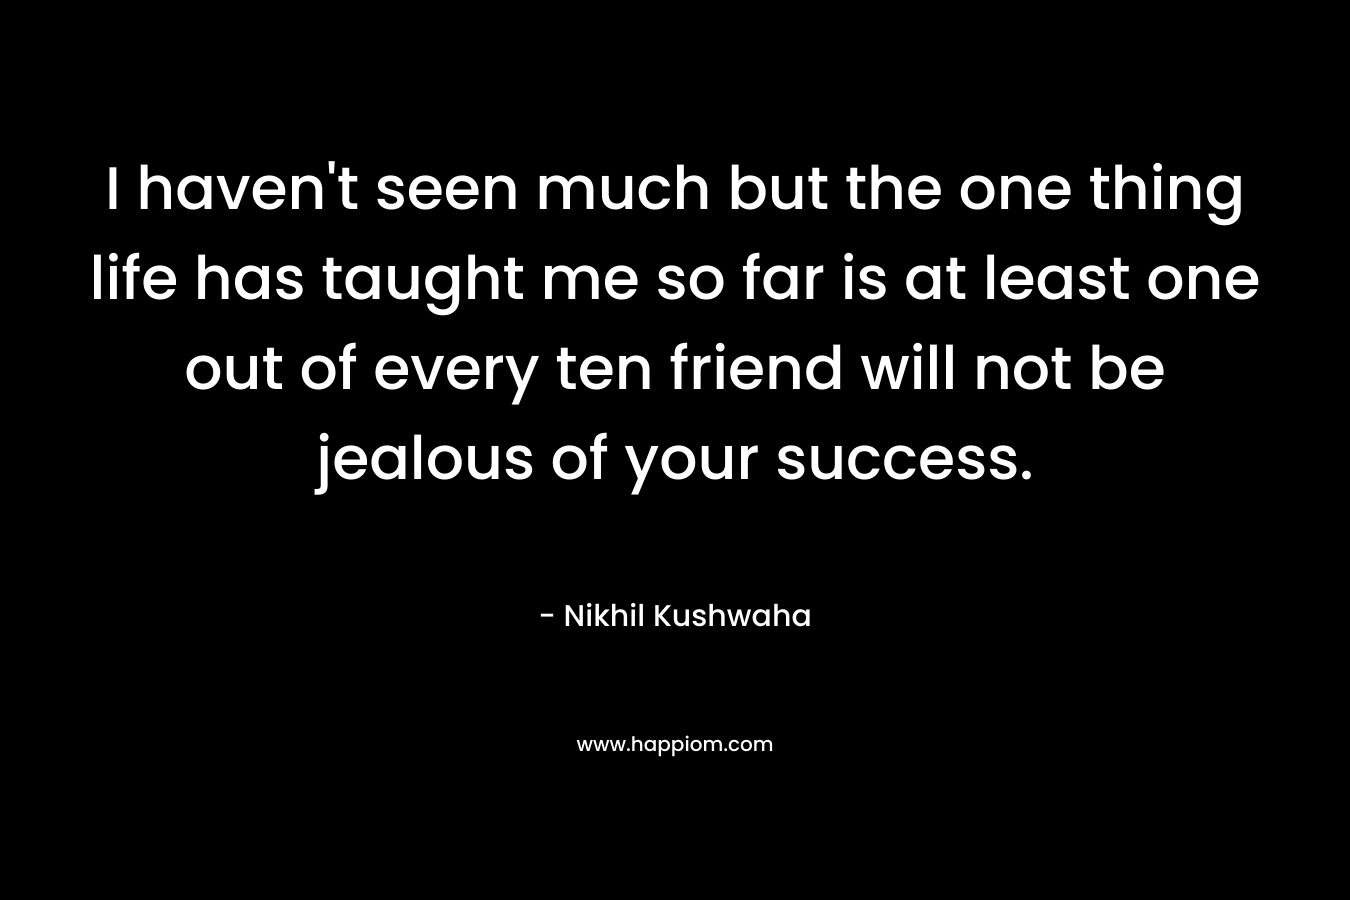 I haven’t seen much but the one thing life has taught me so far is at least one out of every ten friend will not be jealous of your success. – Nikhil Kushwaha